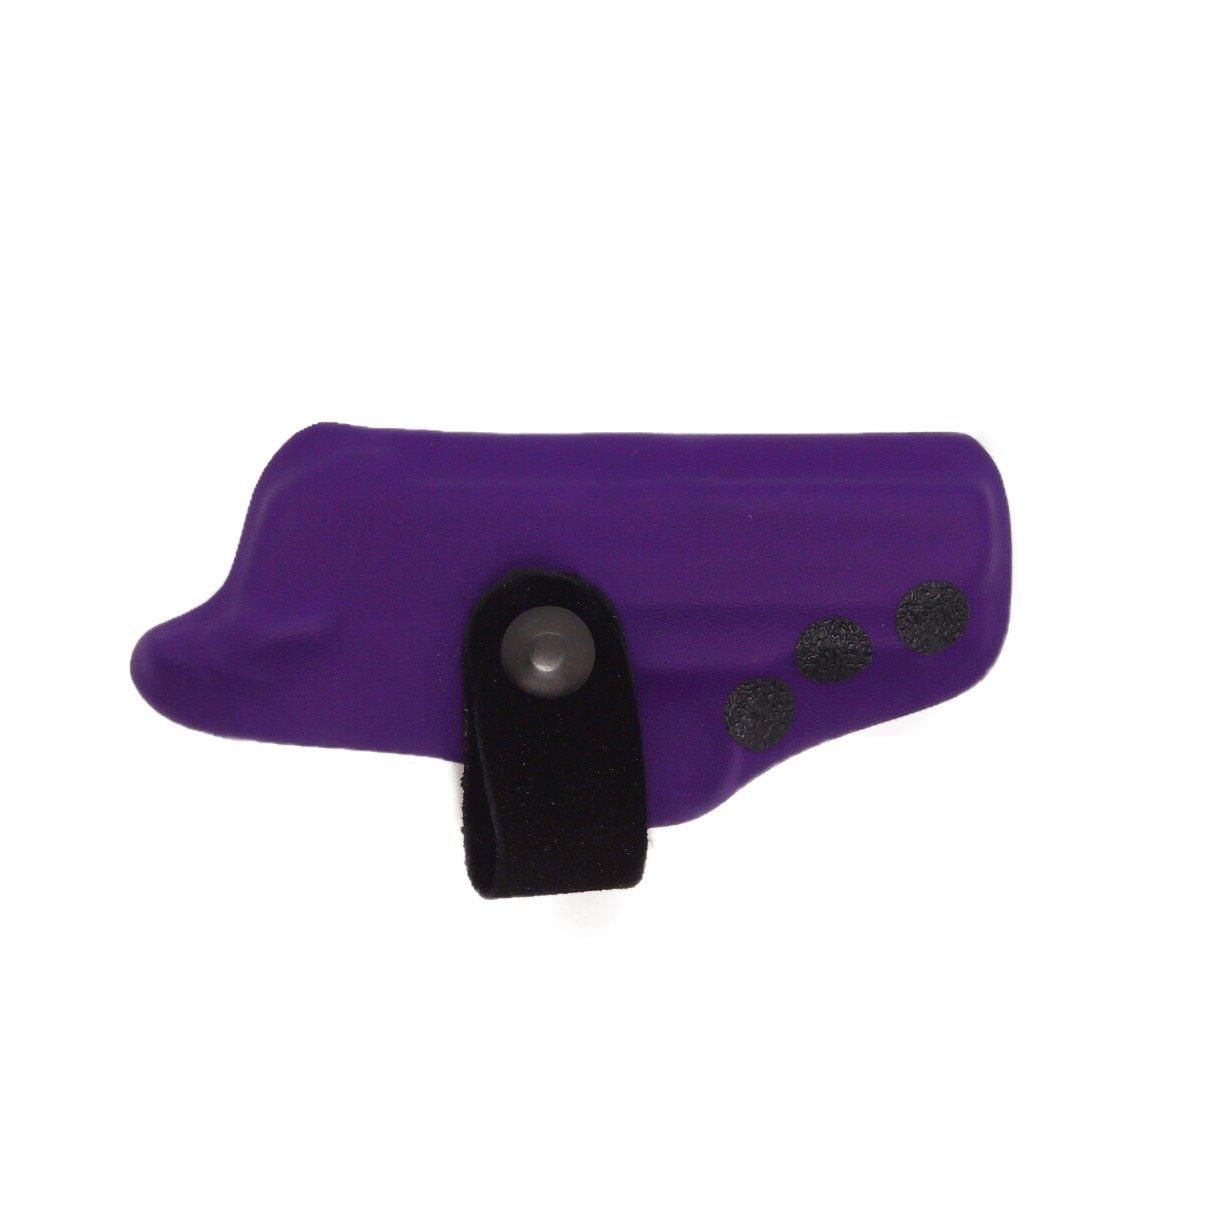 NEW Veronica Suede-Covered IWB holster for women - Flashbang Holsters